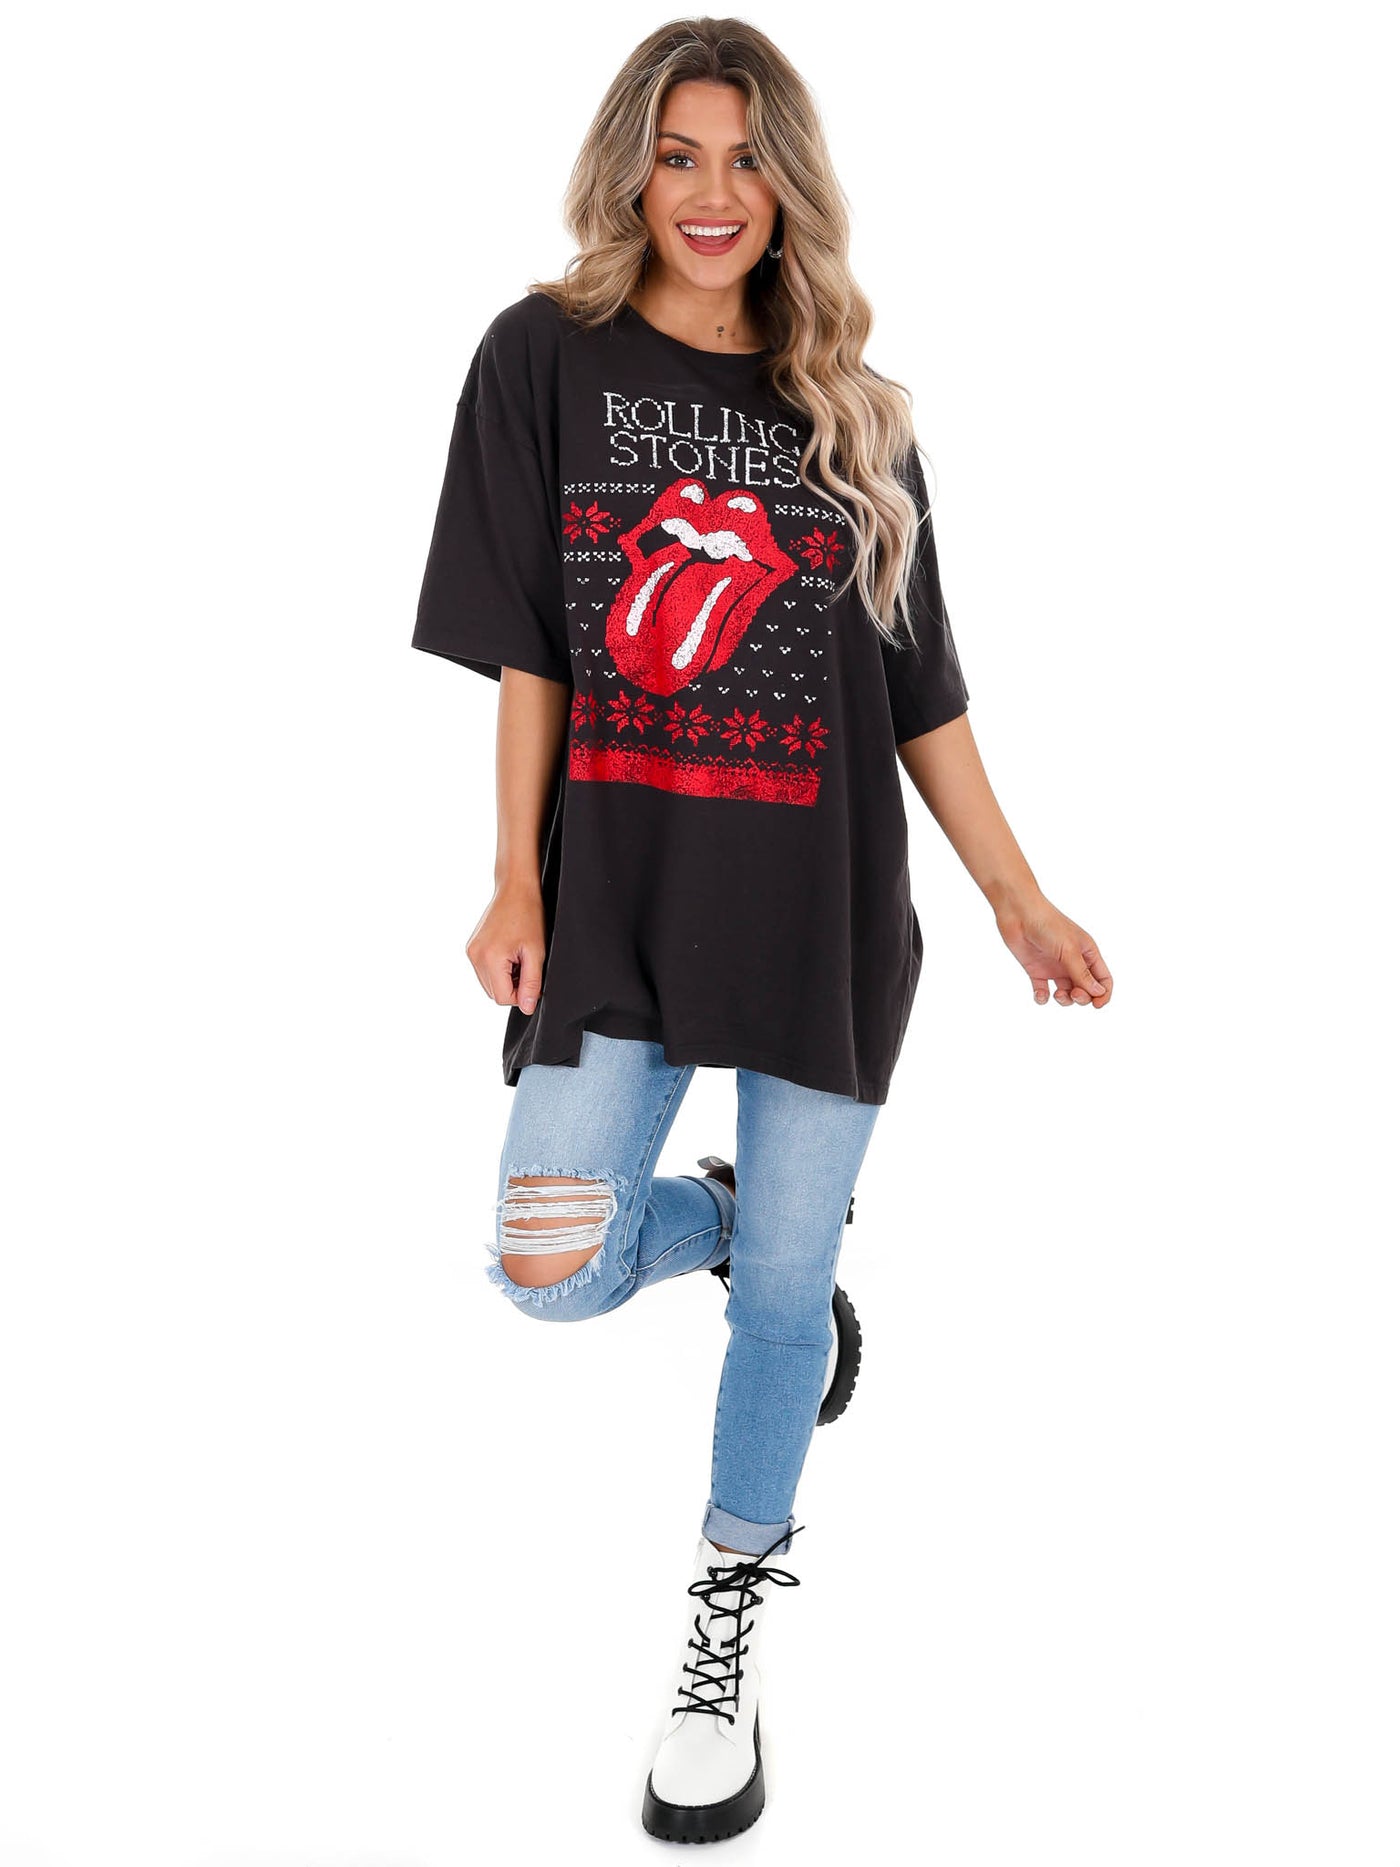 Rolling Stones Norway Sweater Oversized Distressed Tee